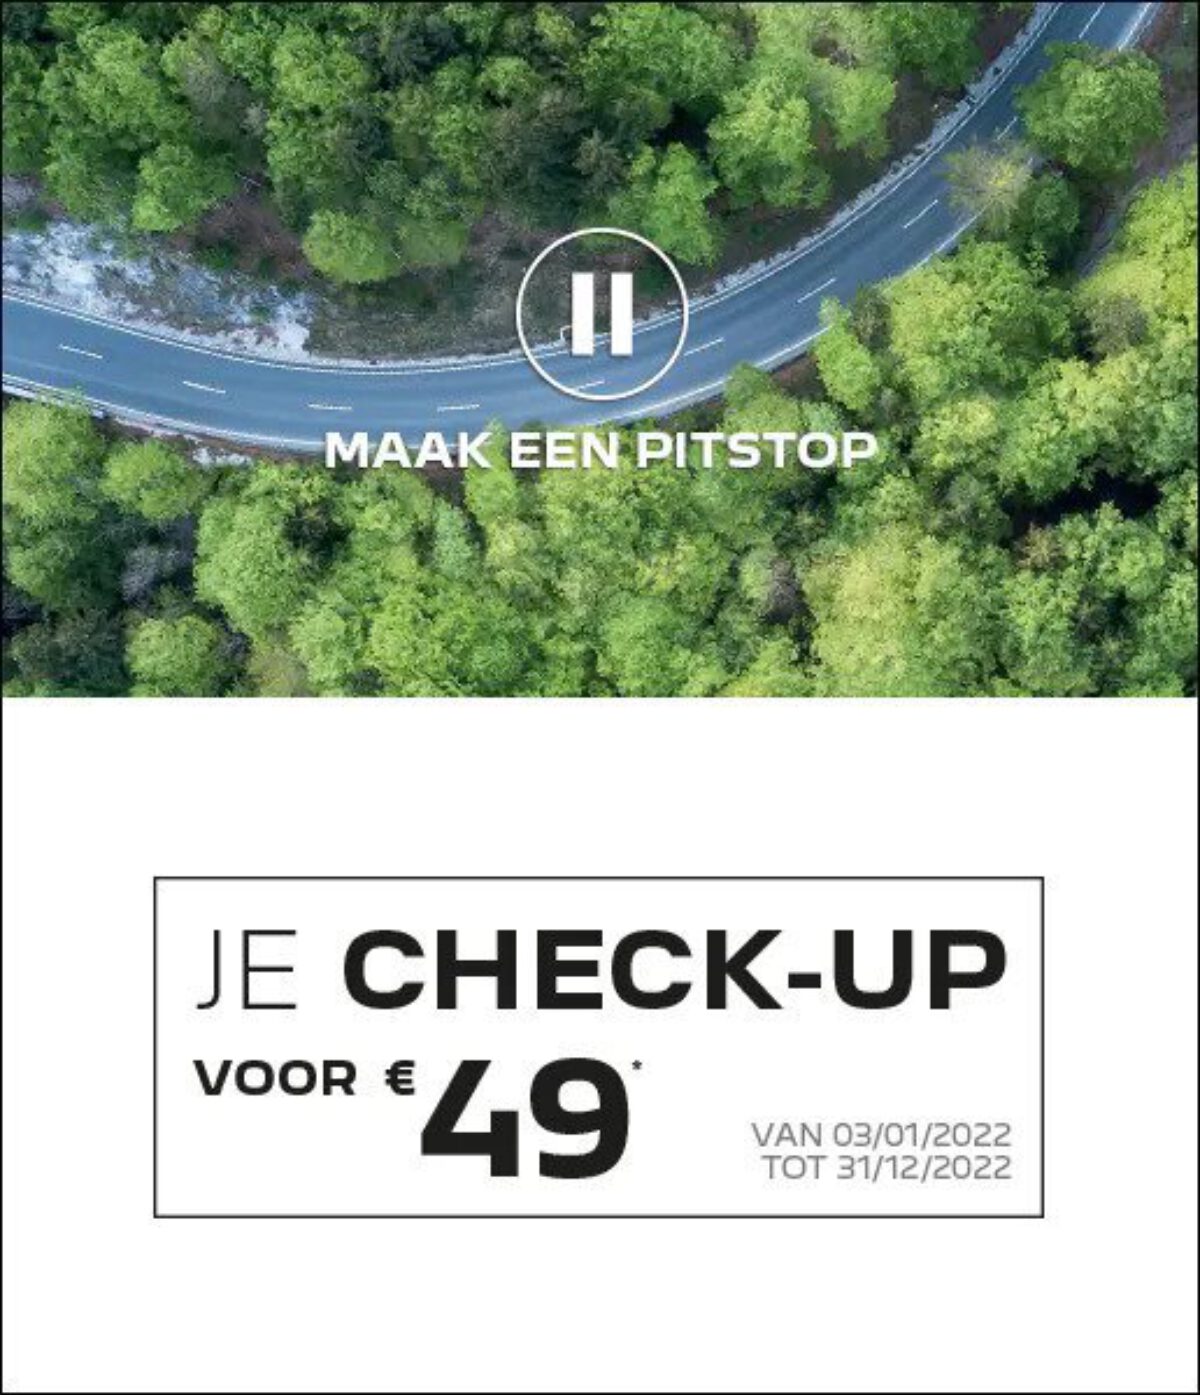 JE CHECK-UP AAN €49